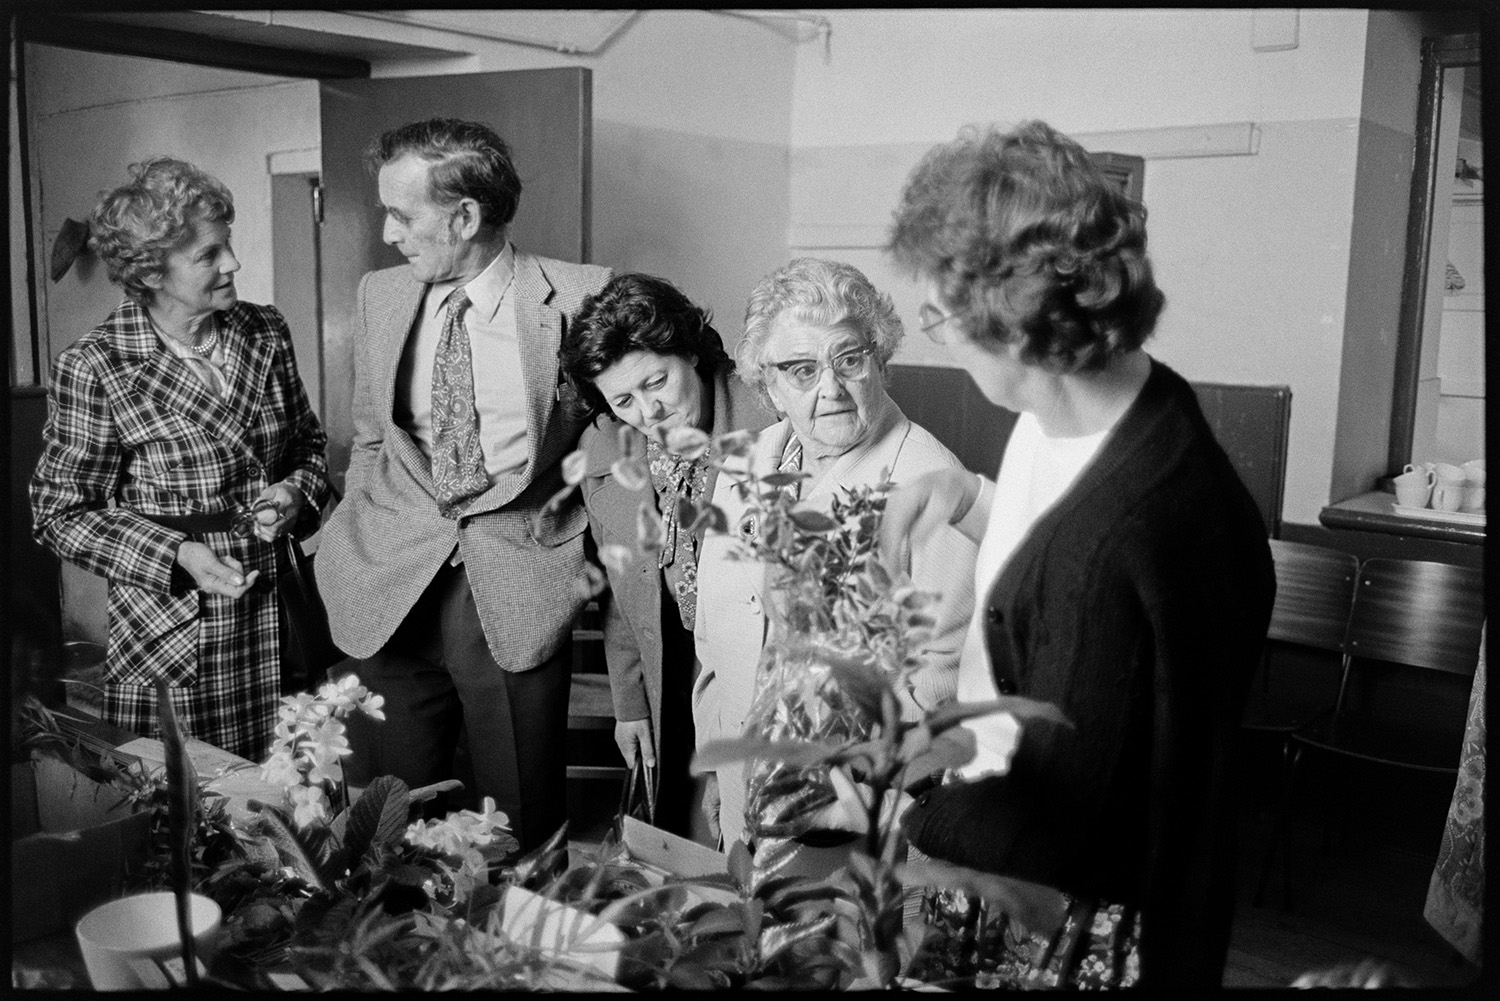 Stalls in village hall, people looking at produce.
[Four women and a man talking and looking at plants on a table in Roborough Village Hall at Roborough Fair.]